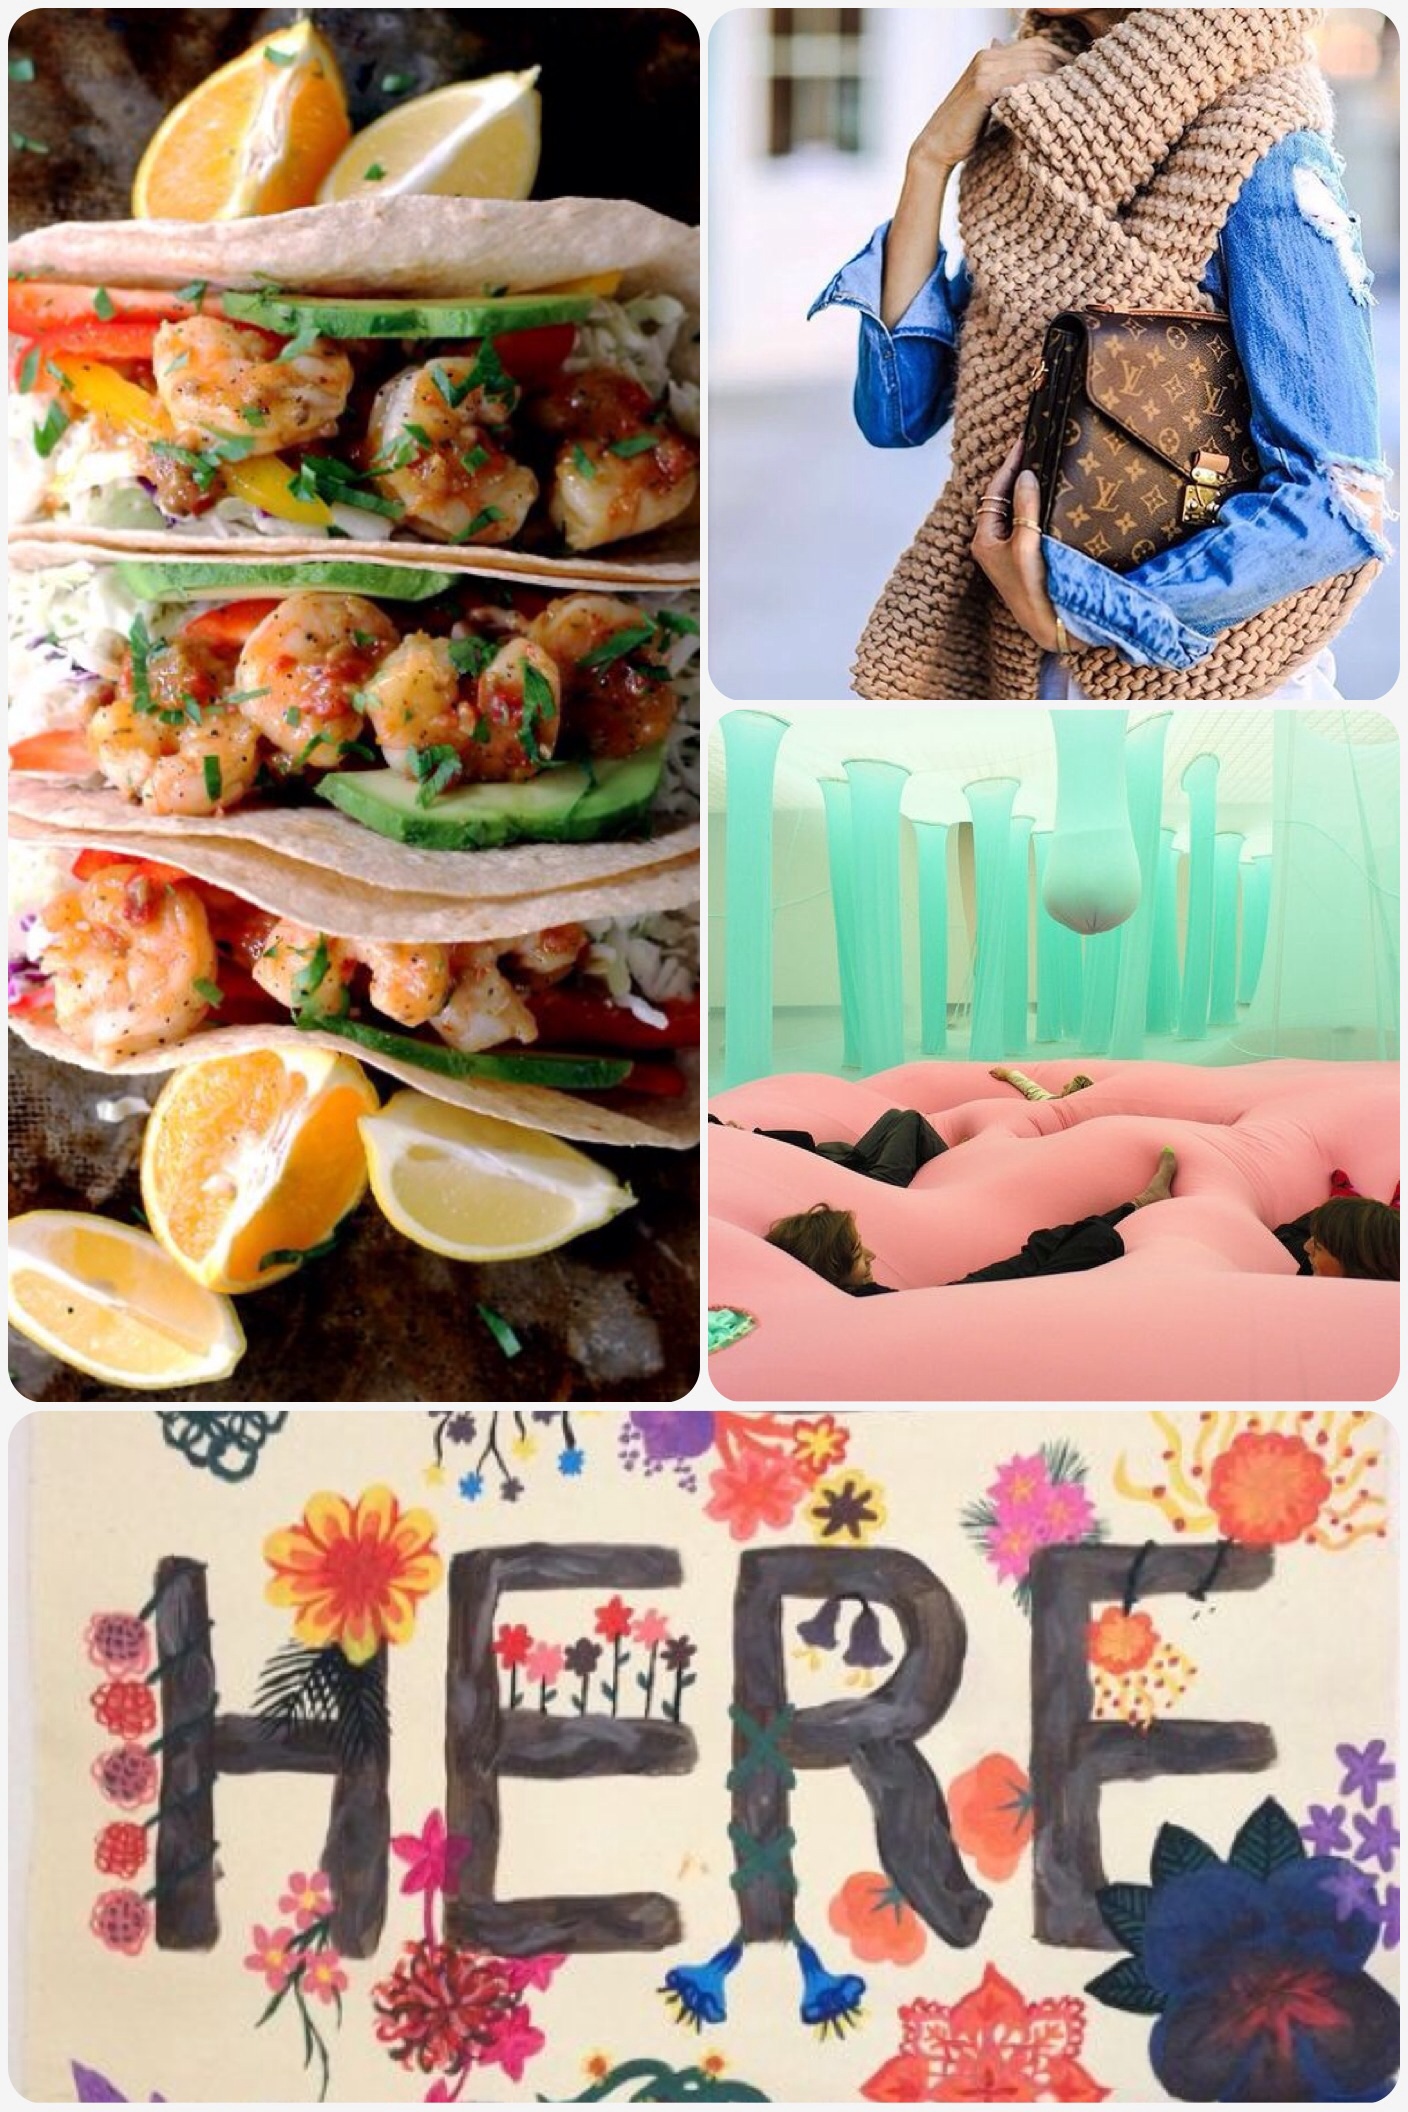 Fab Friday - shrimp tacos, oversized knits, playscape art installation, be here now quote